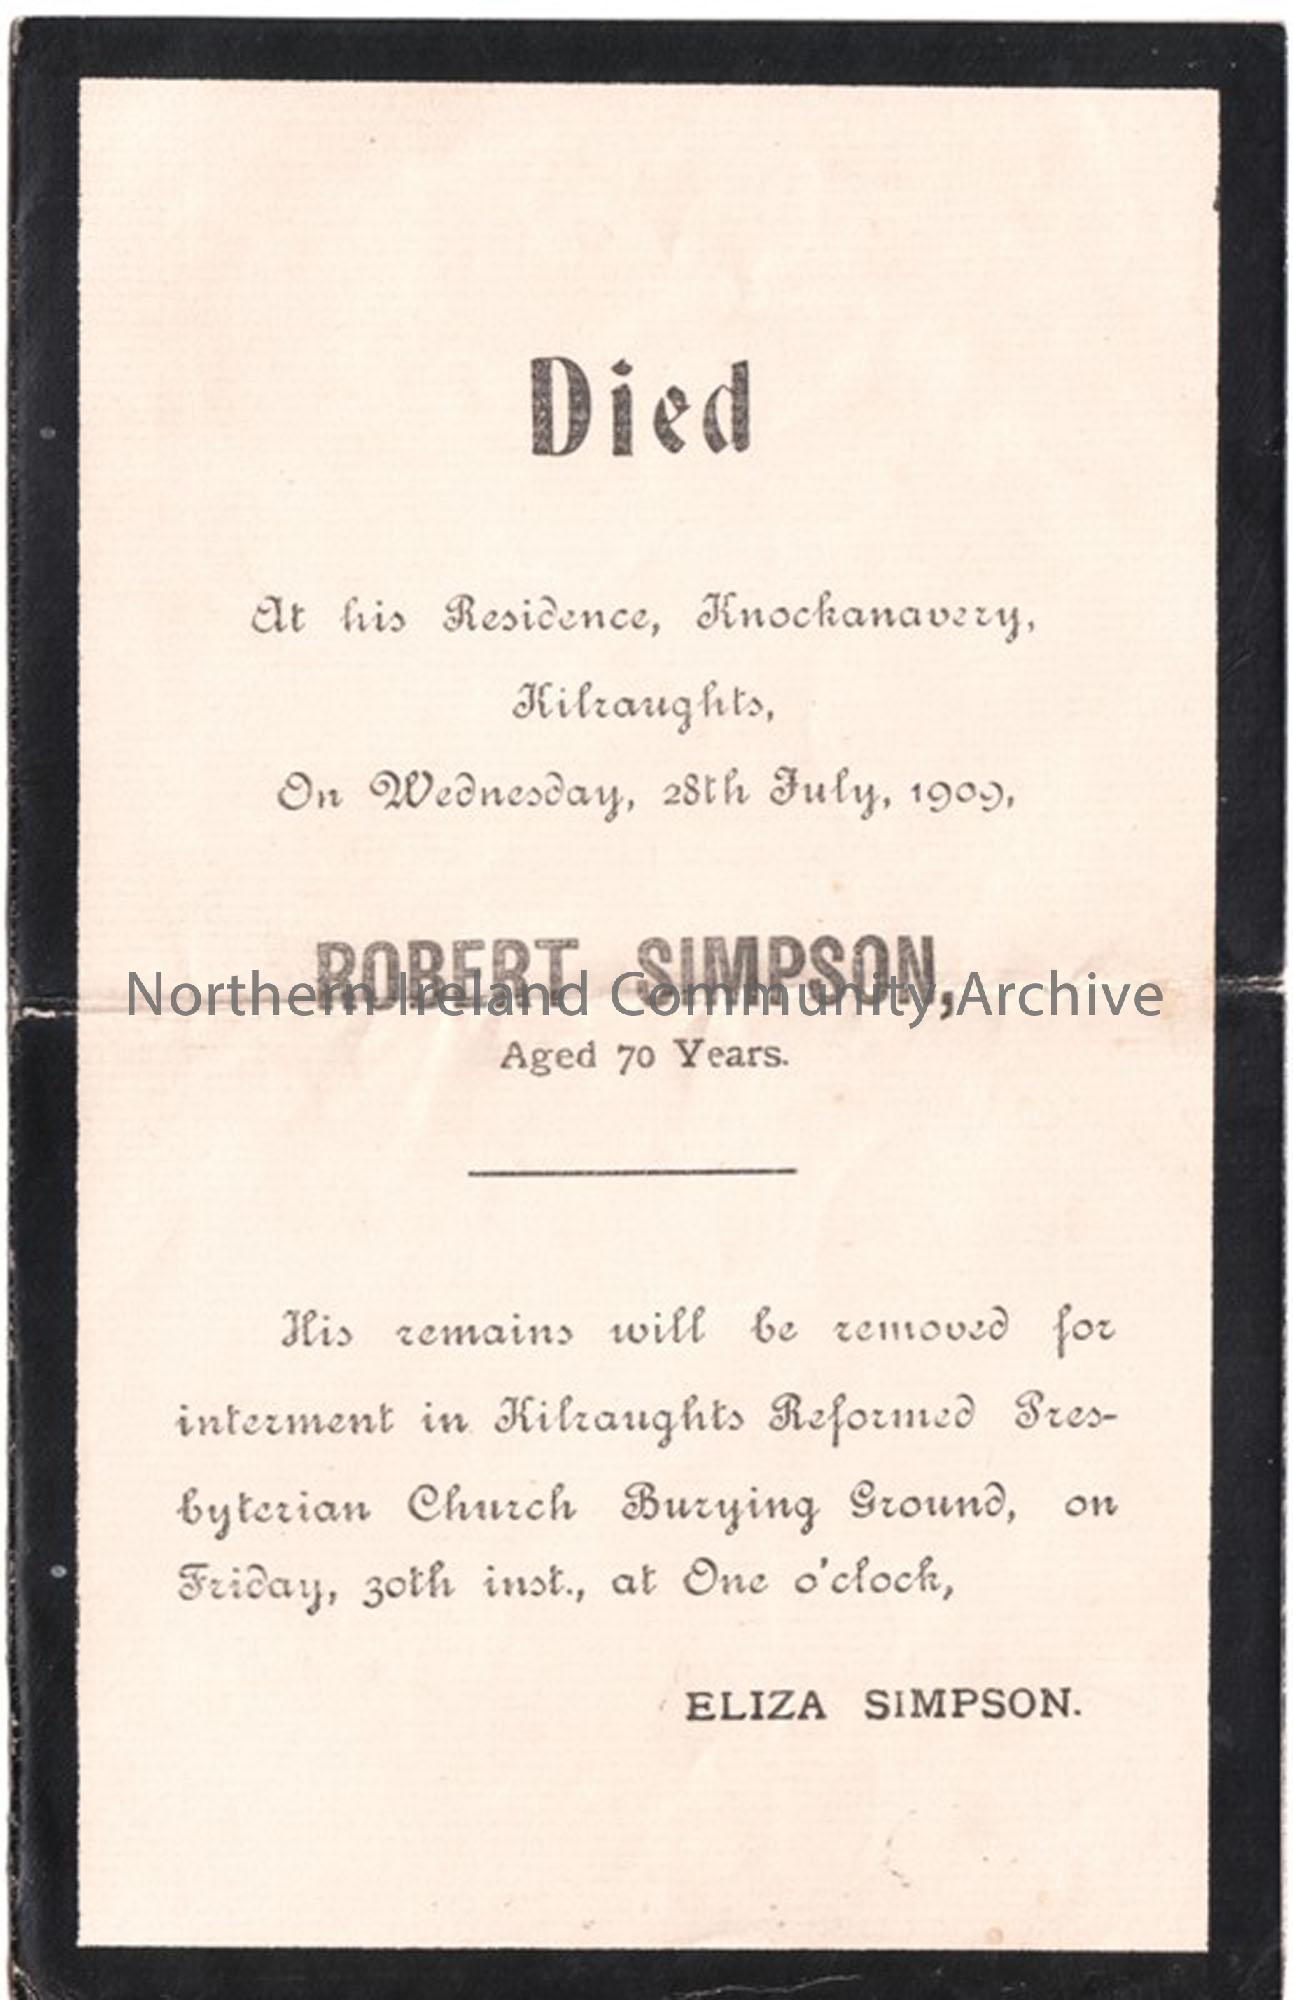 Death notice of Mr Robert Simpson, of Knockanavery, d. 28th July 1909, aged 70 years